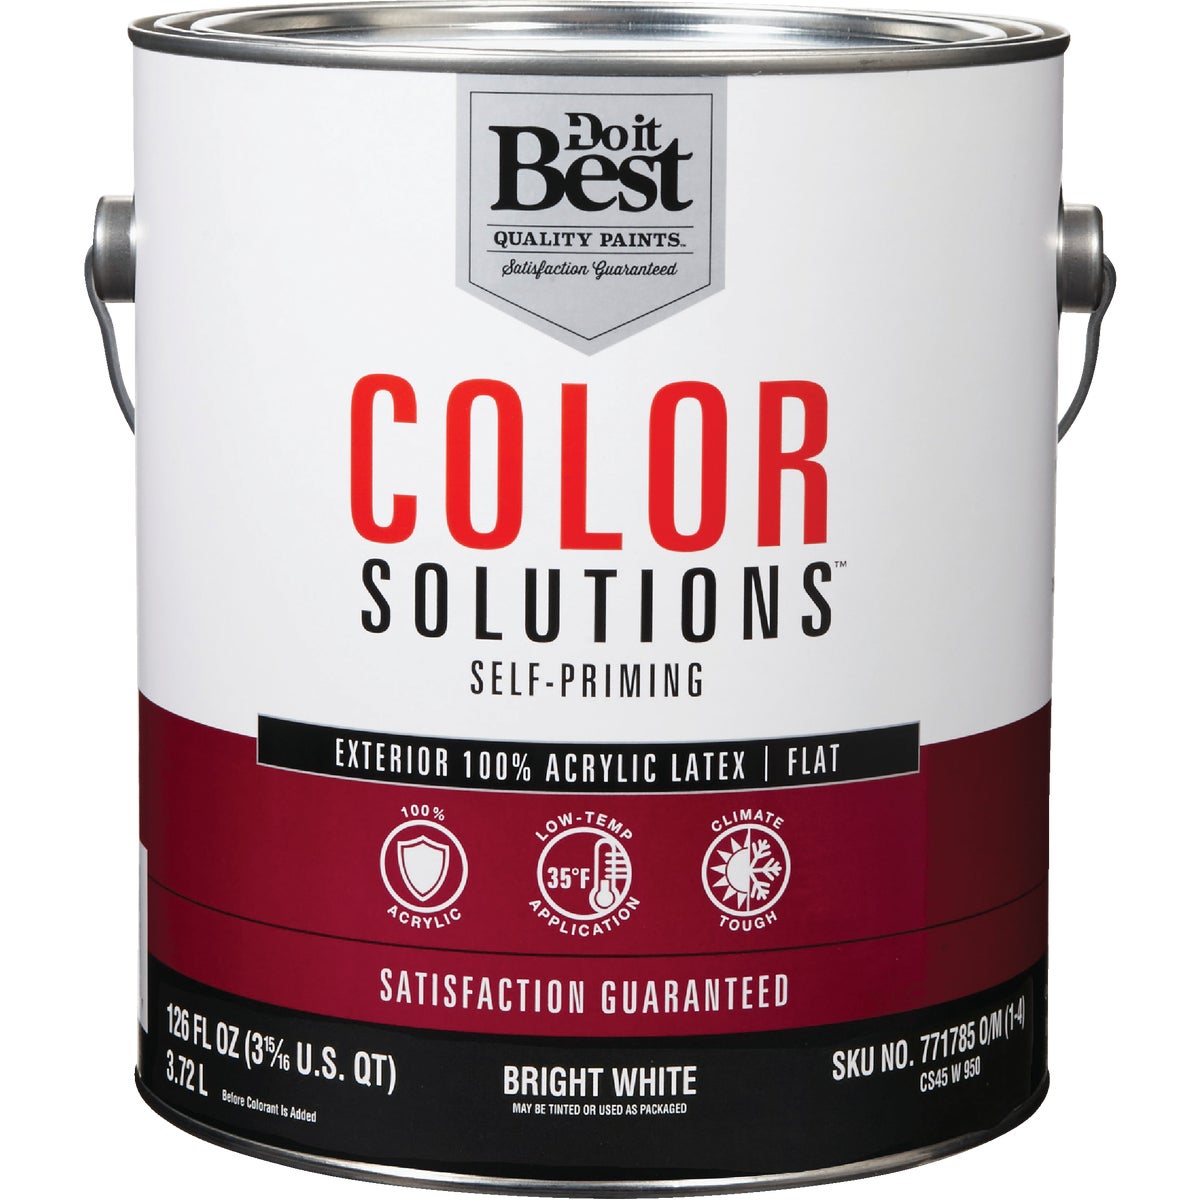 Item 771785, This paint is formulated with 100% acrylic resins for durability and 